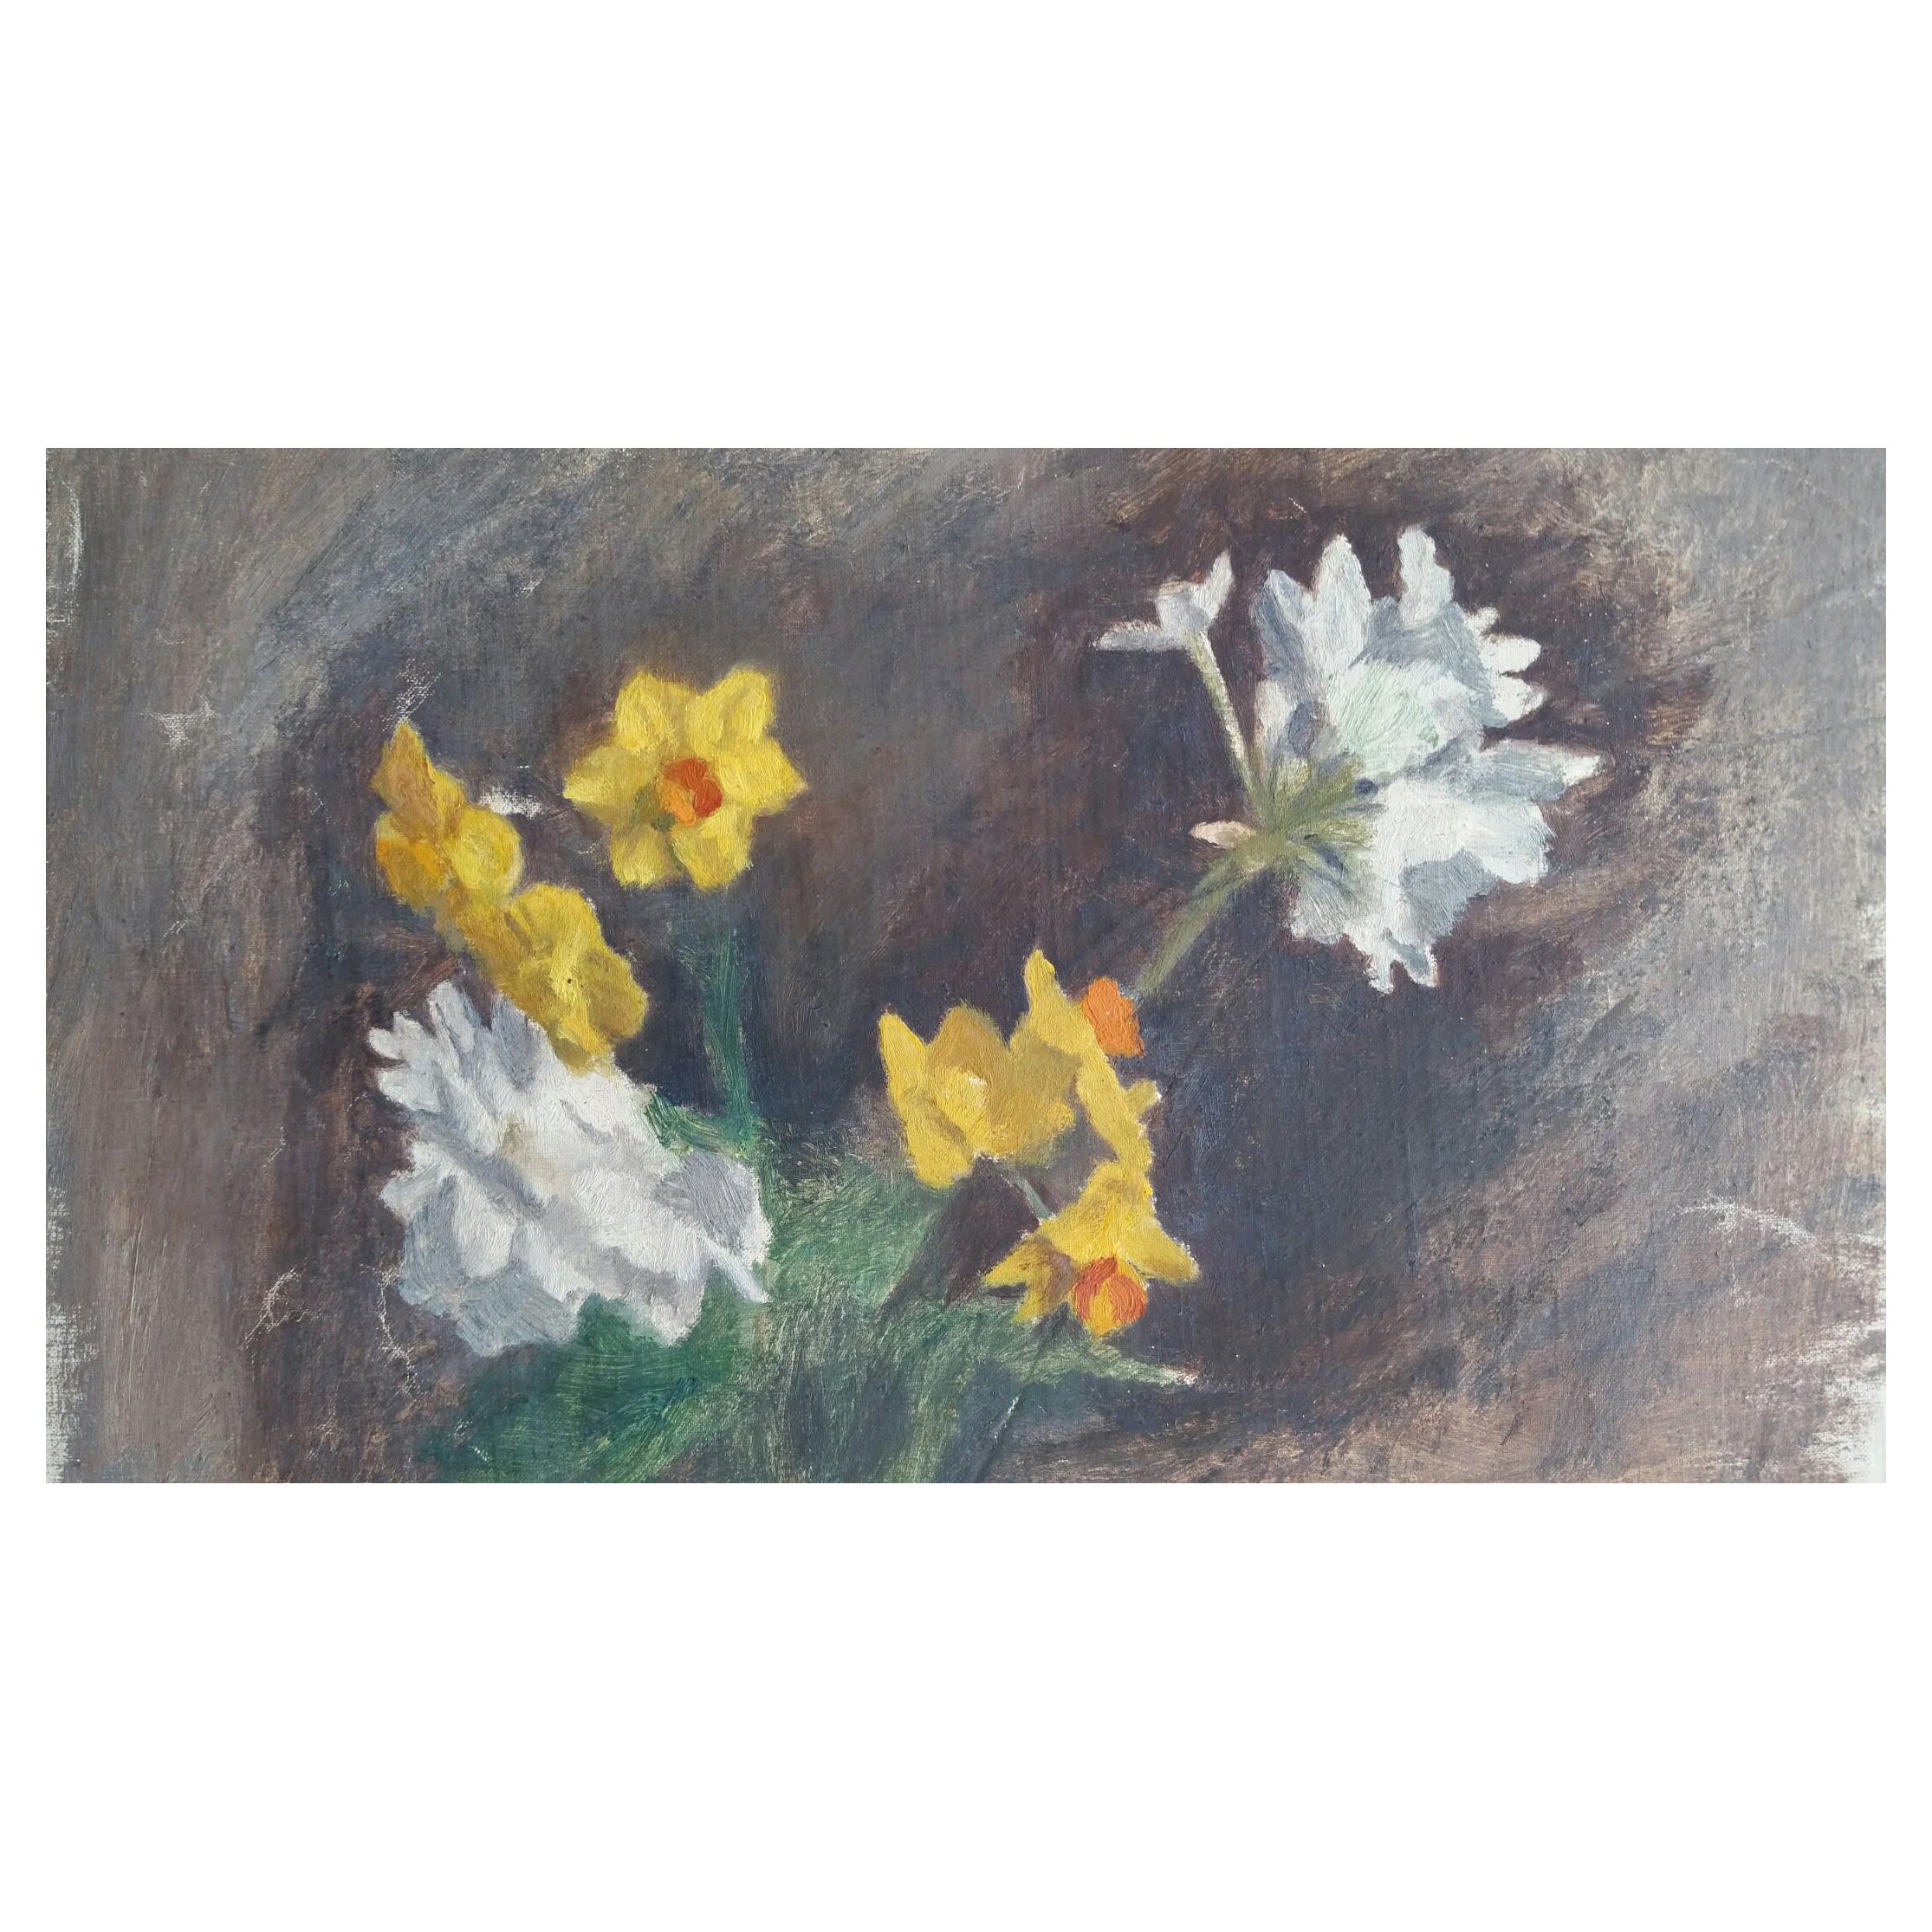 English Vintage Oil Painting on Canvas, Spring Flowers